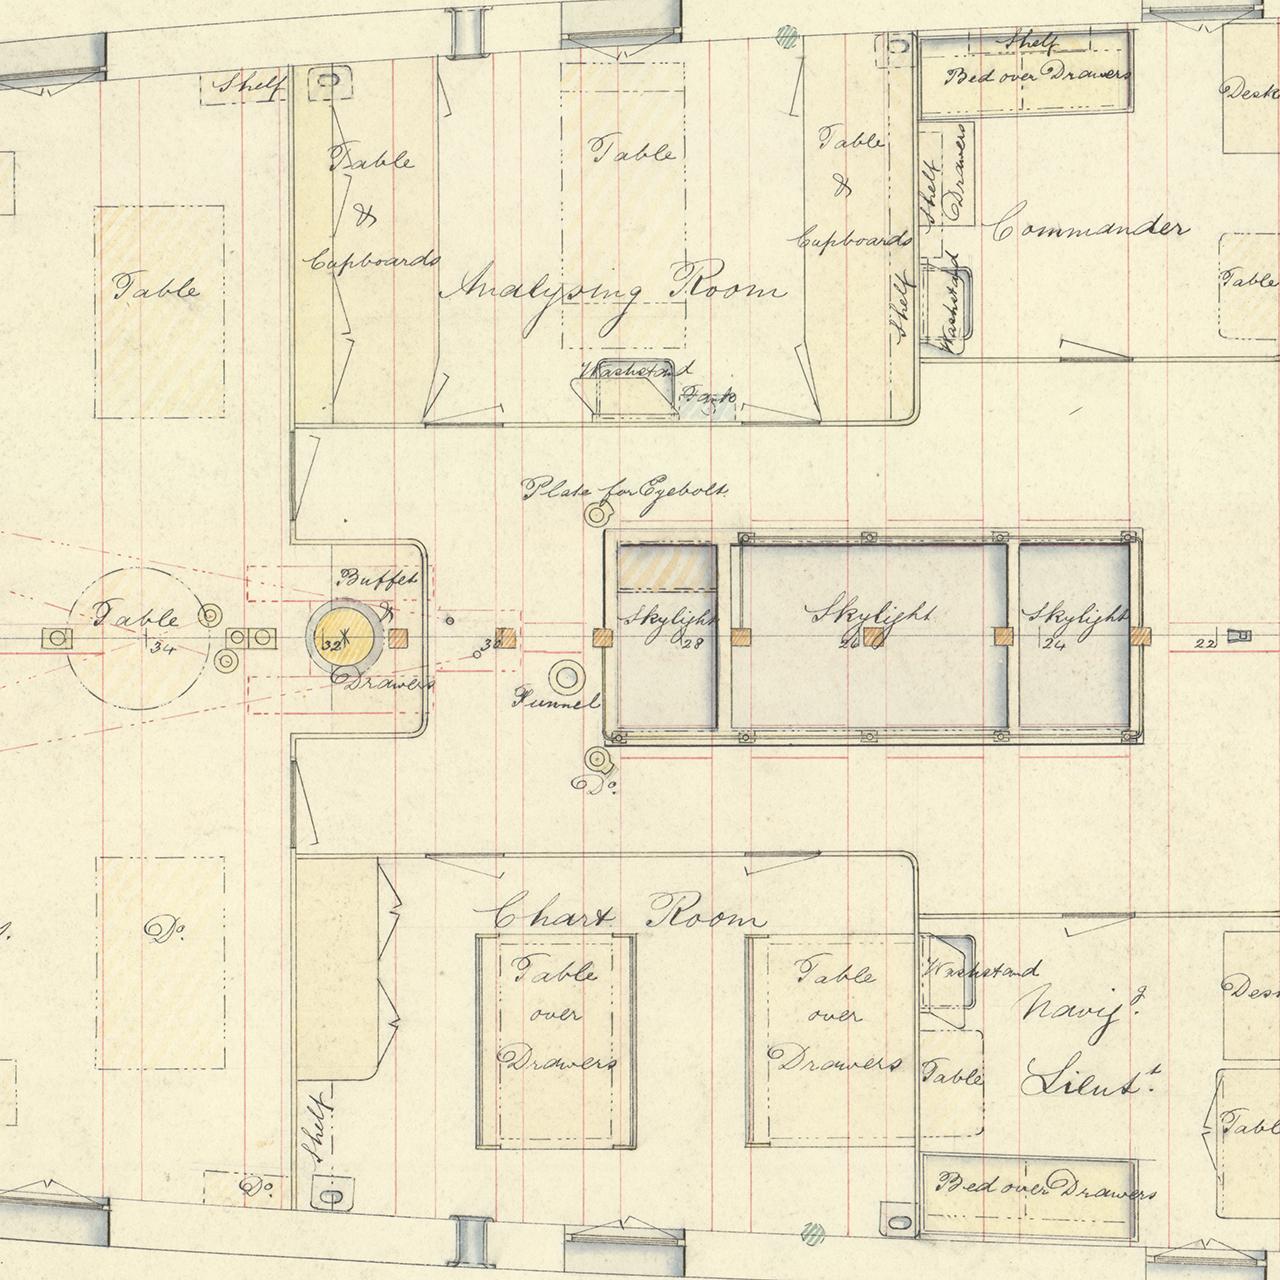 Detail from the main deck plan of HMS Challenger, showing designs for an 'analysing room' and 'chart room' (NPA8446)